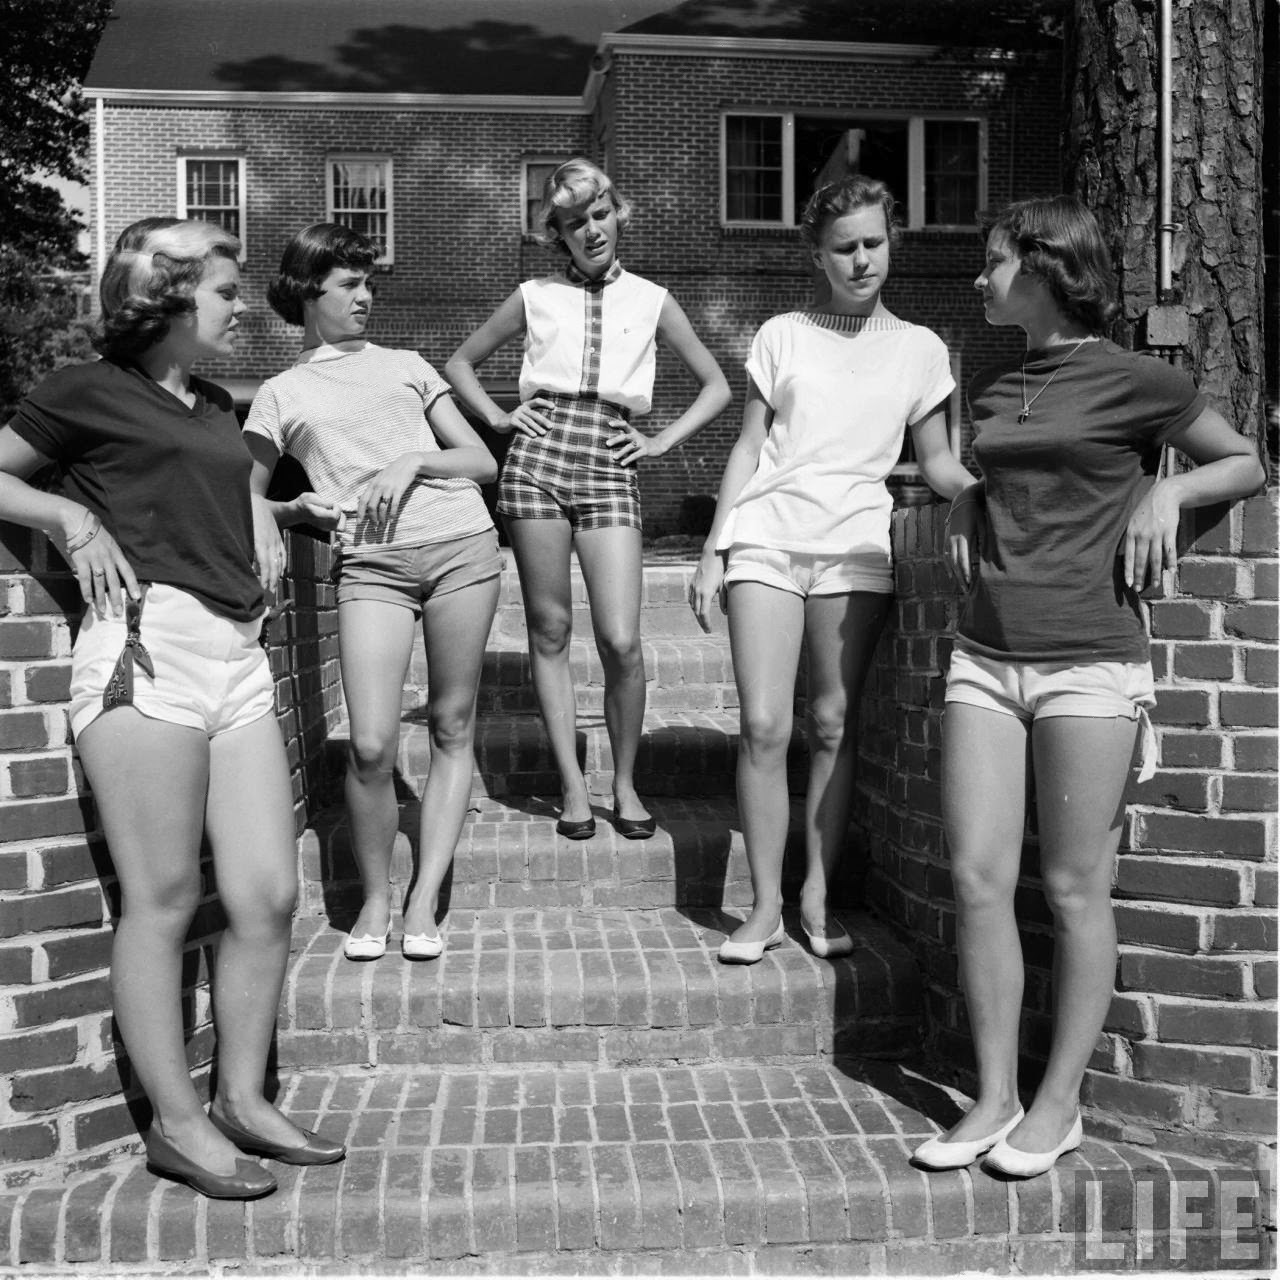 Short Shorts in the 1950s ~ Vintage Everyday